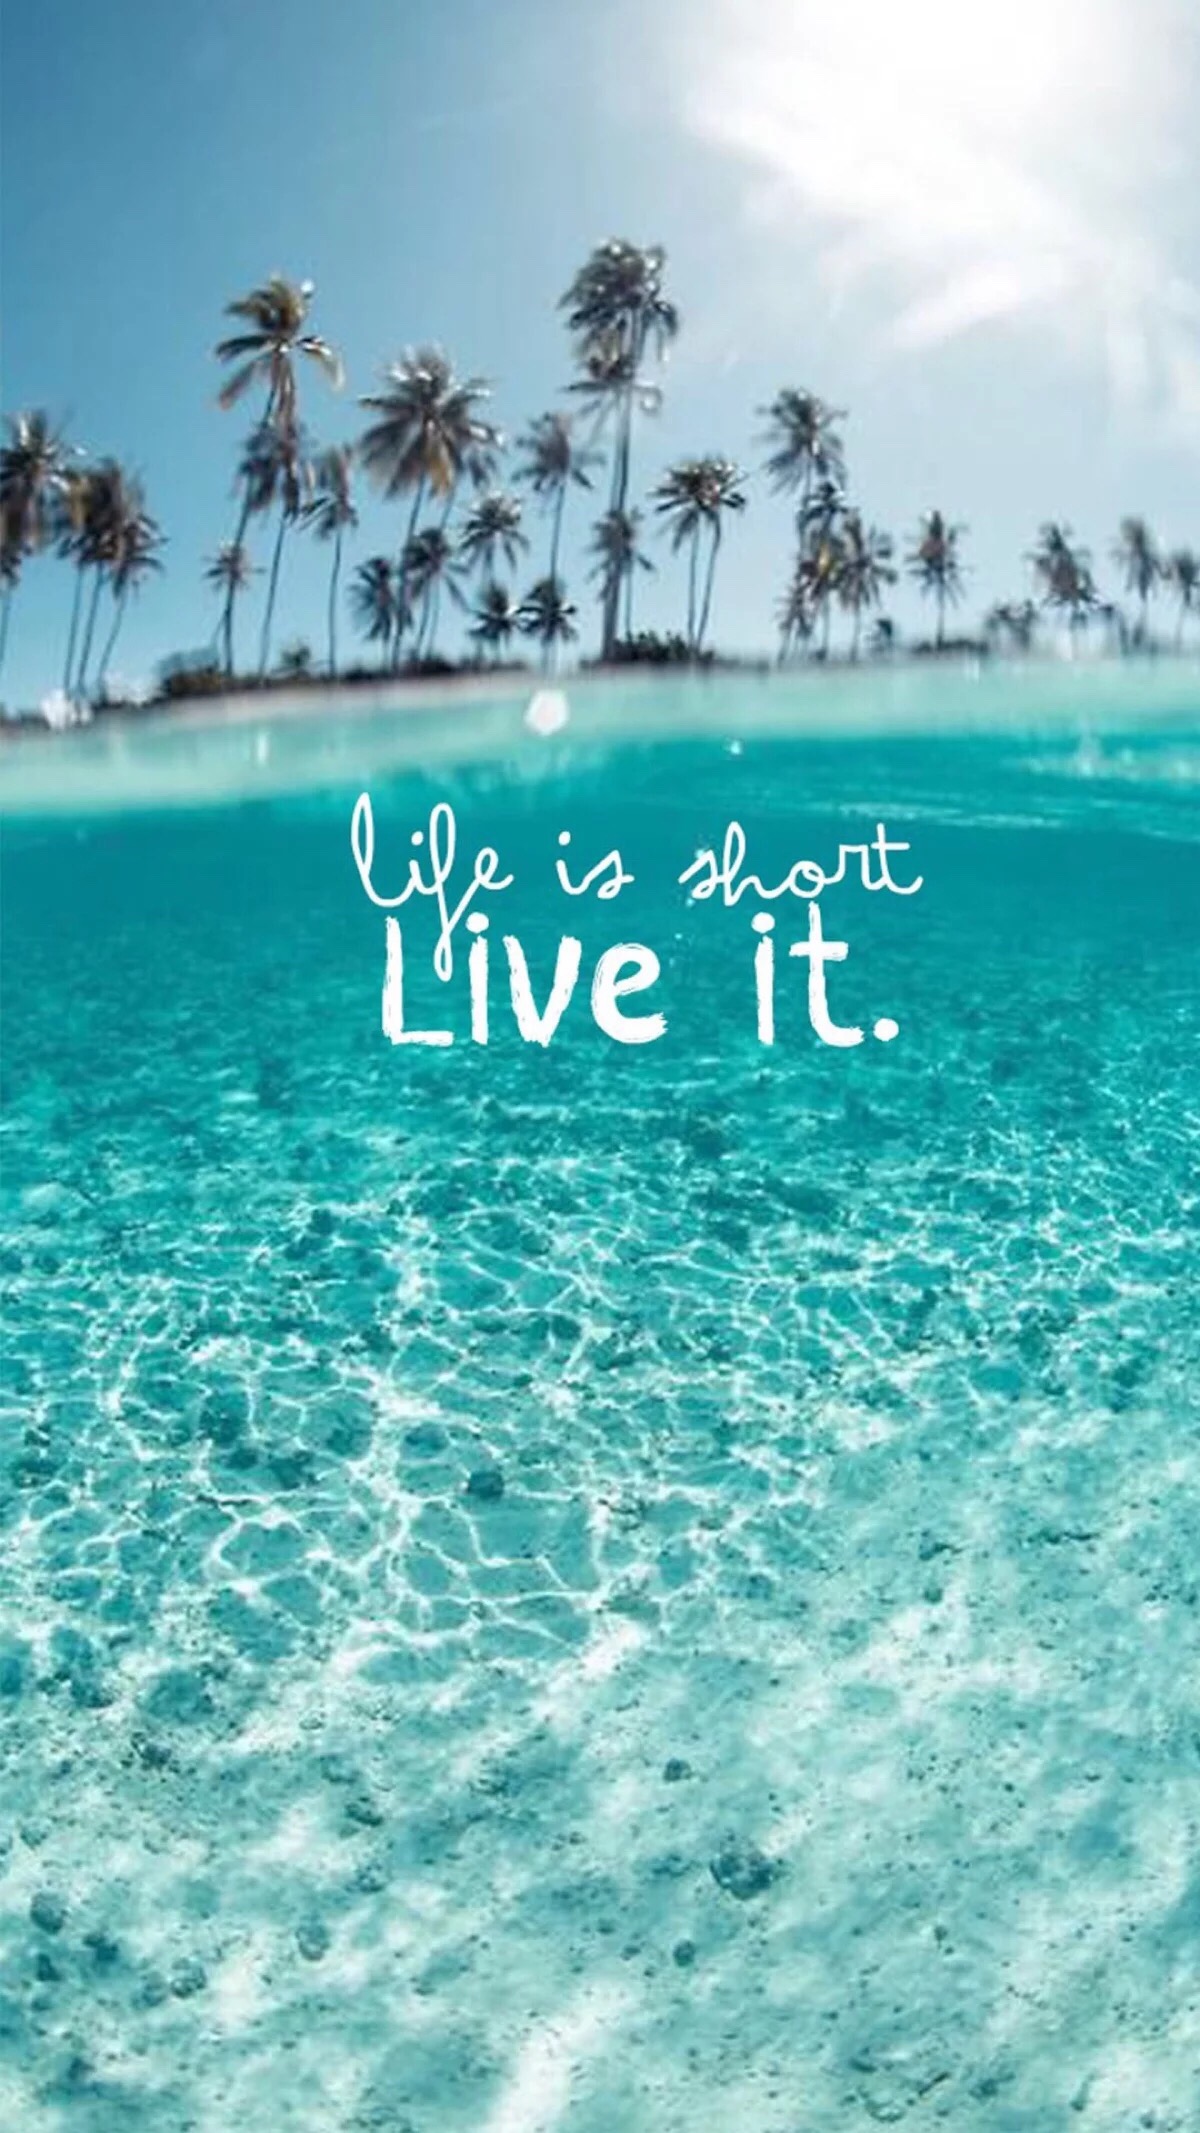 life is about live it. 壁纸